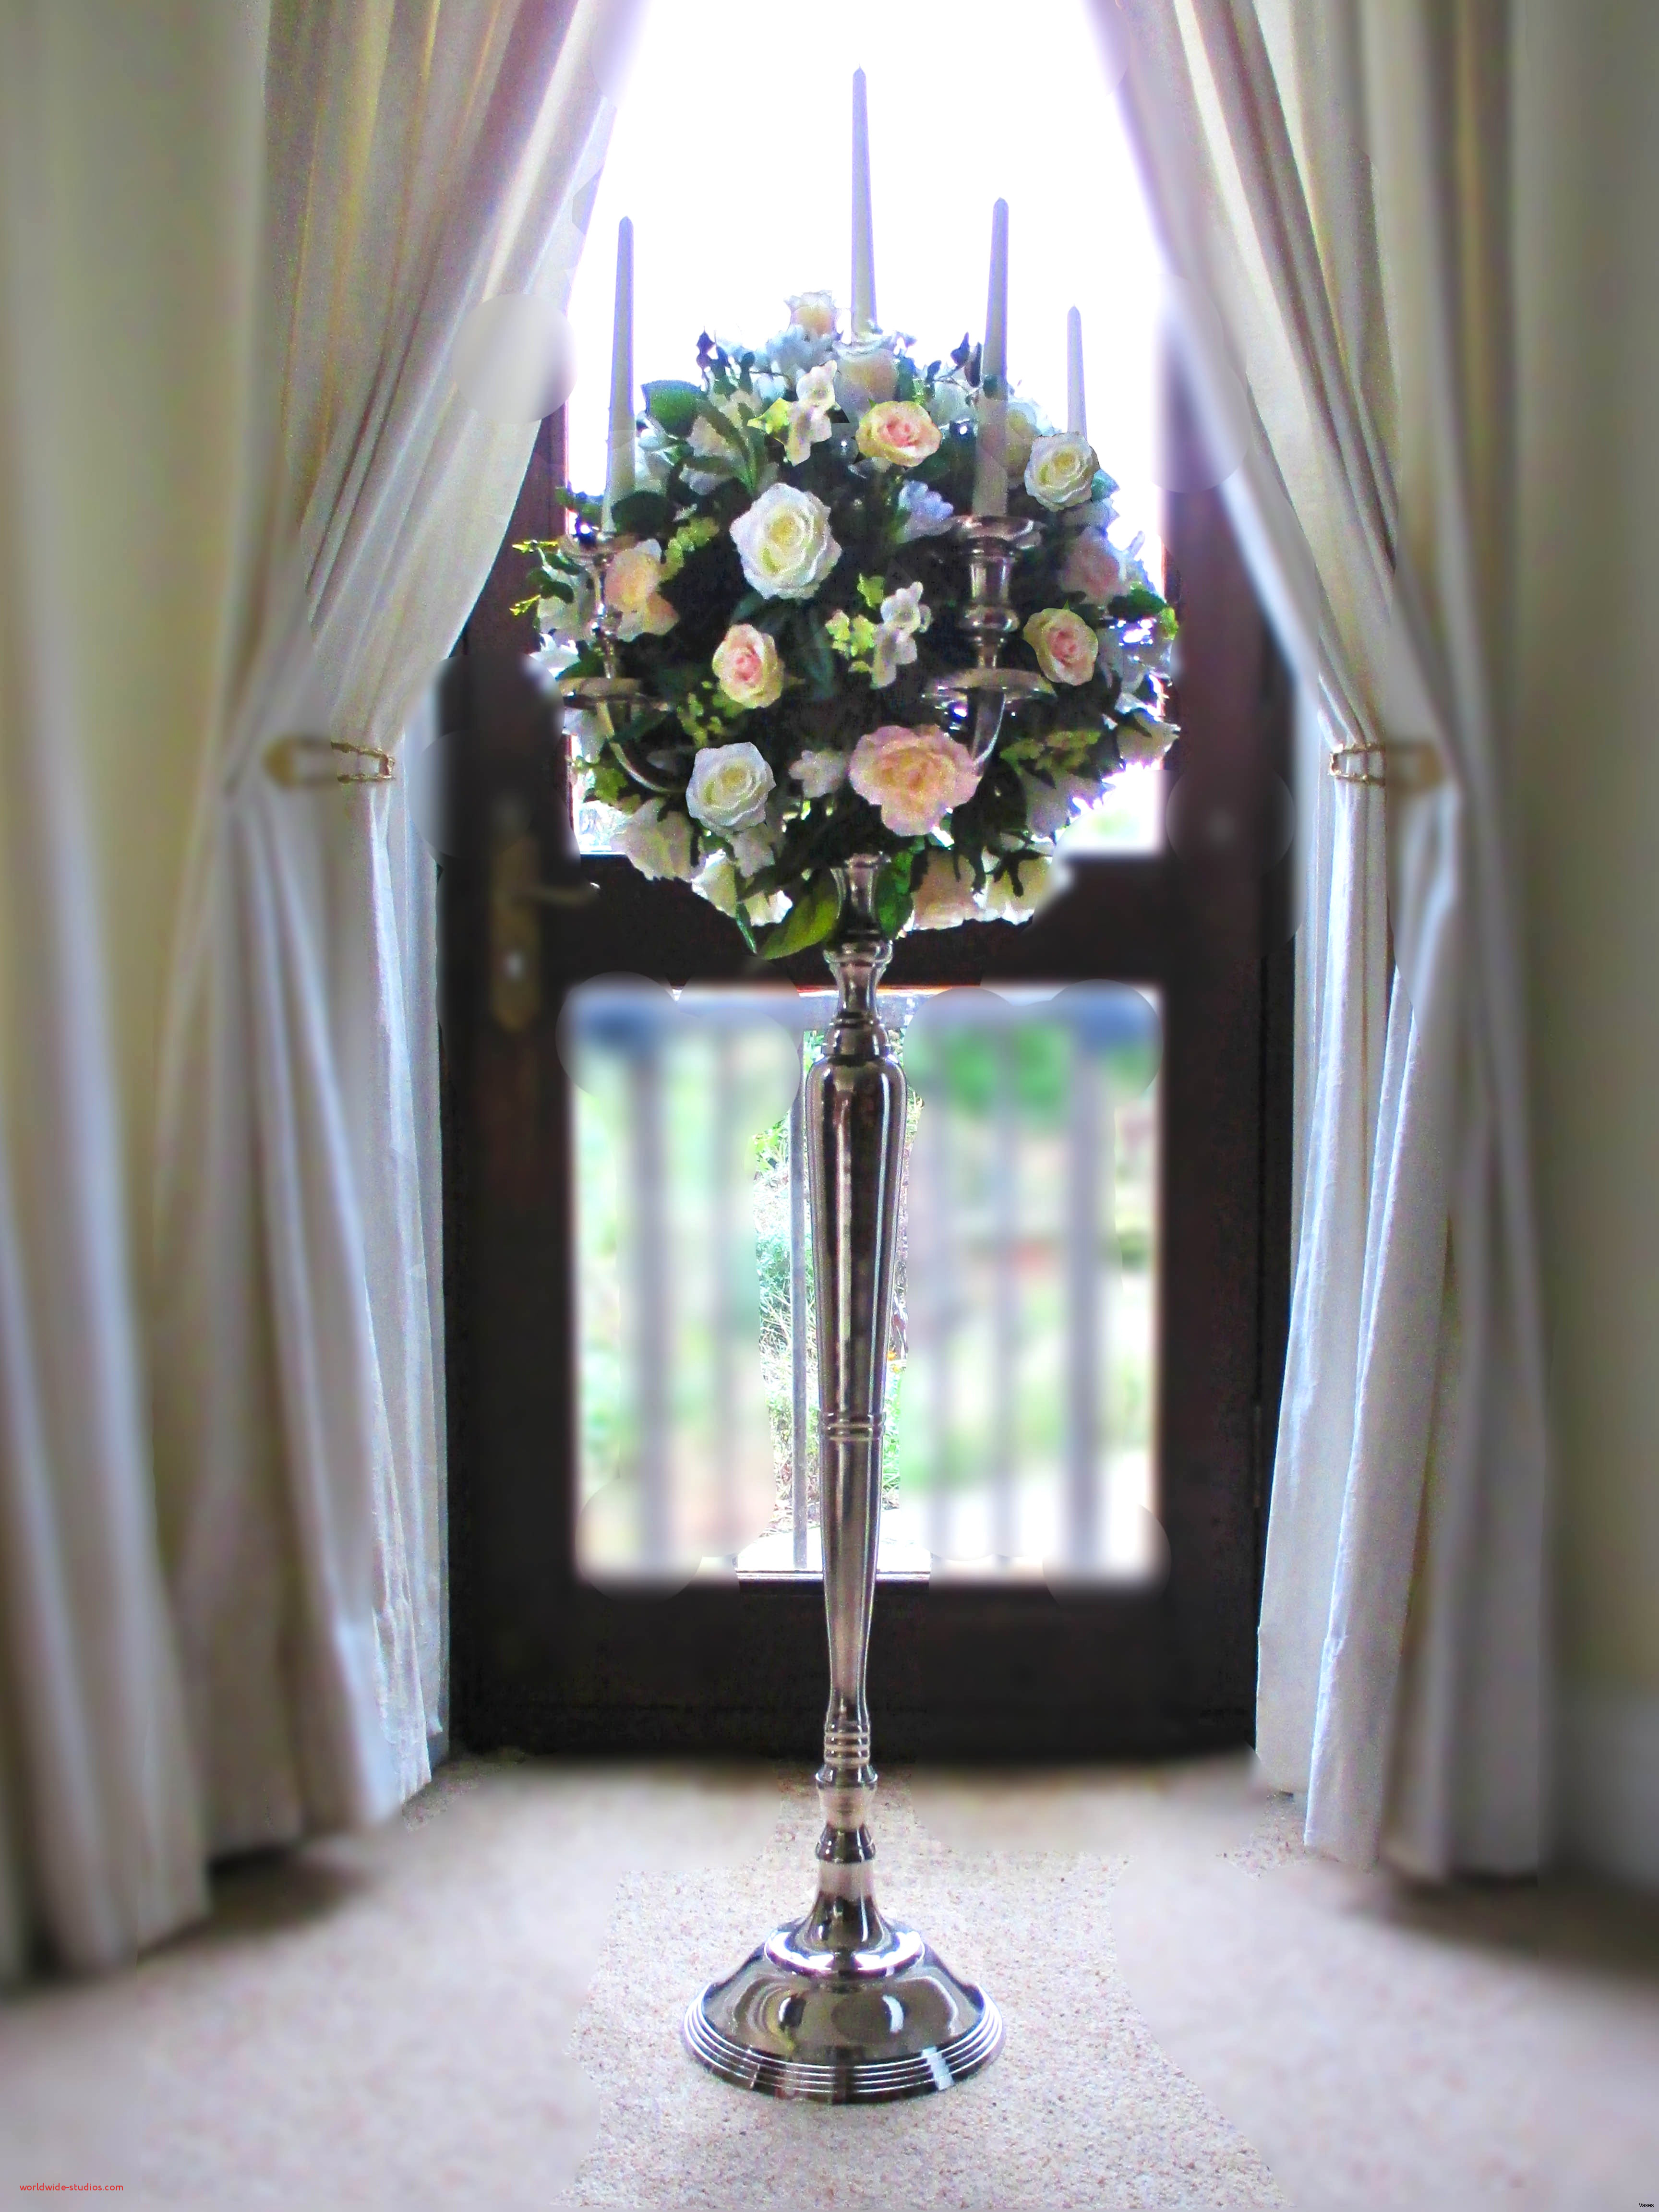 13 Wonderful Gold Trumpet Vase 2023 free download gold trumpet vase of silver vases for weddings www topsimages com pertaining to top result diy wedding ideas for a tight budget luxury cheap wedding bouquets packages vases jpg